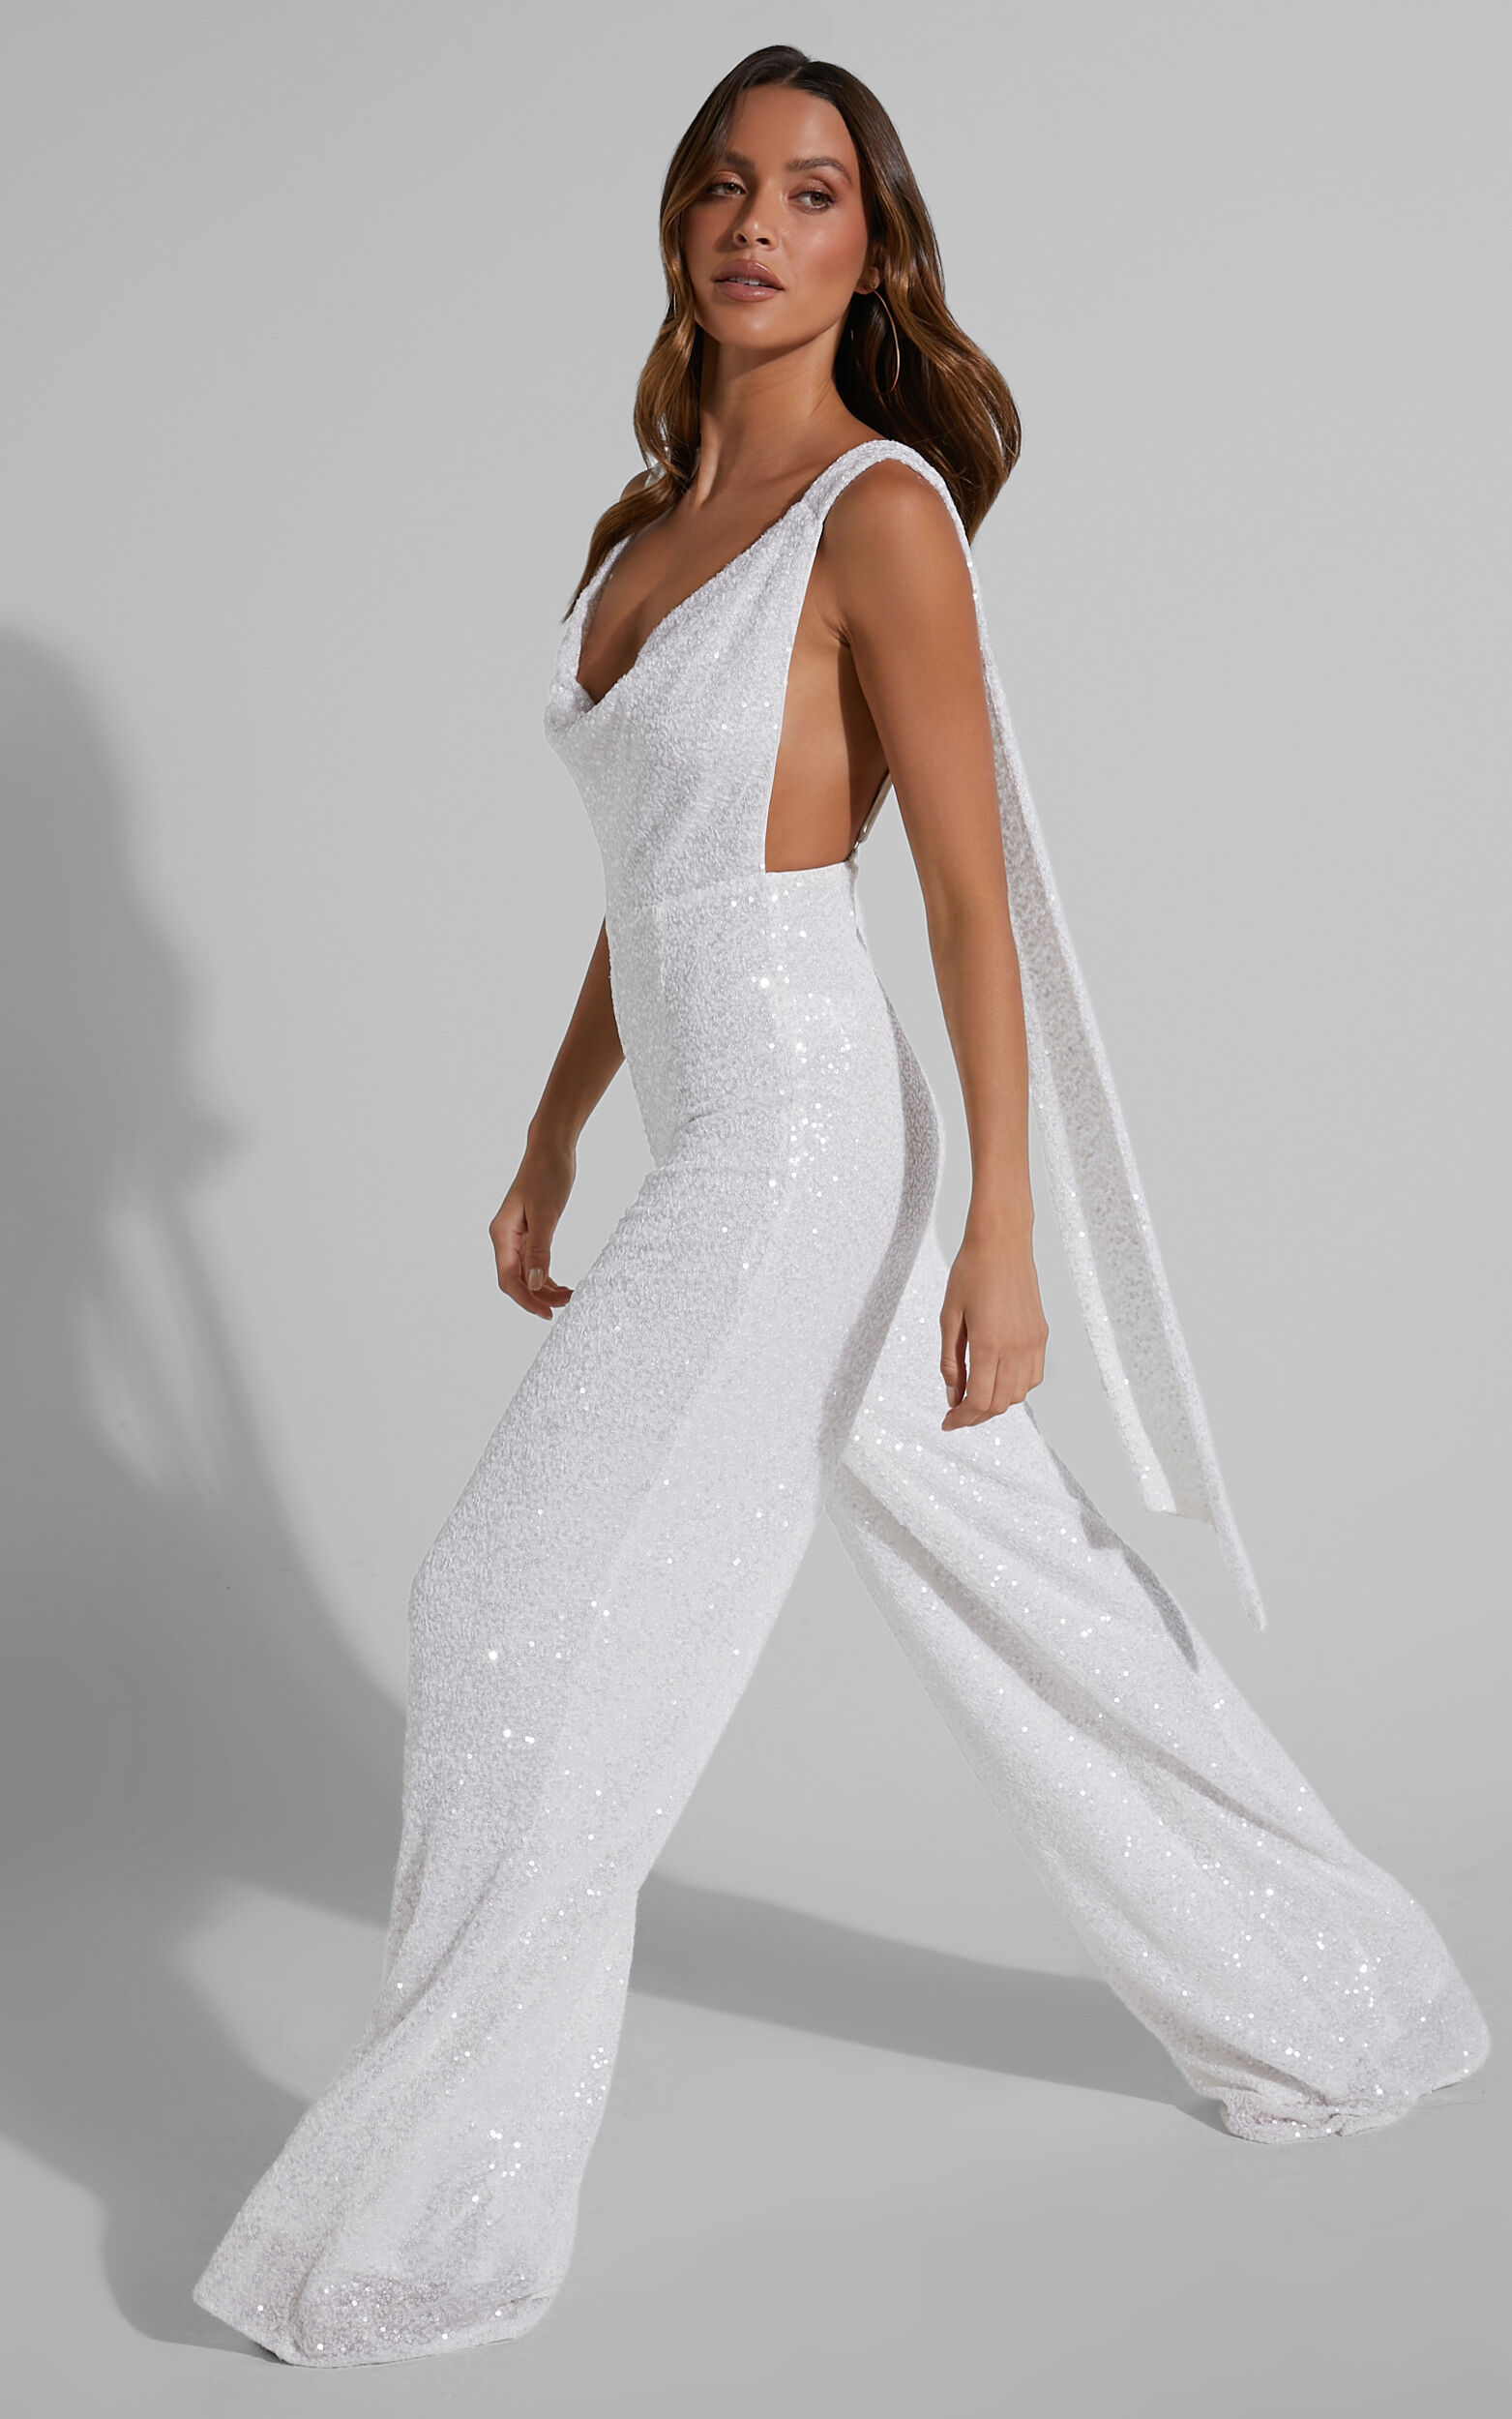 Malisha Cowl Neck Backless Jumpsuit in White Sequin - 06, WHT1, super-hi-res image number null